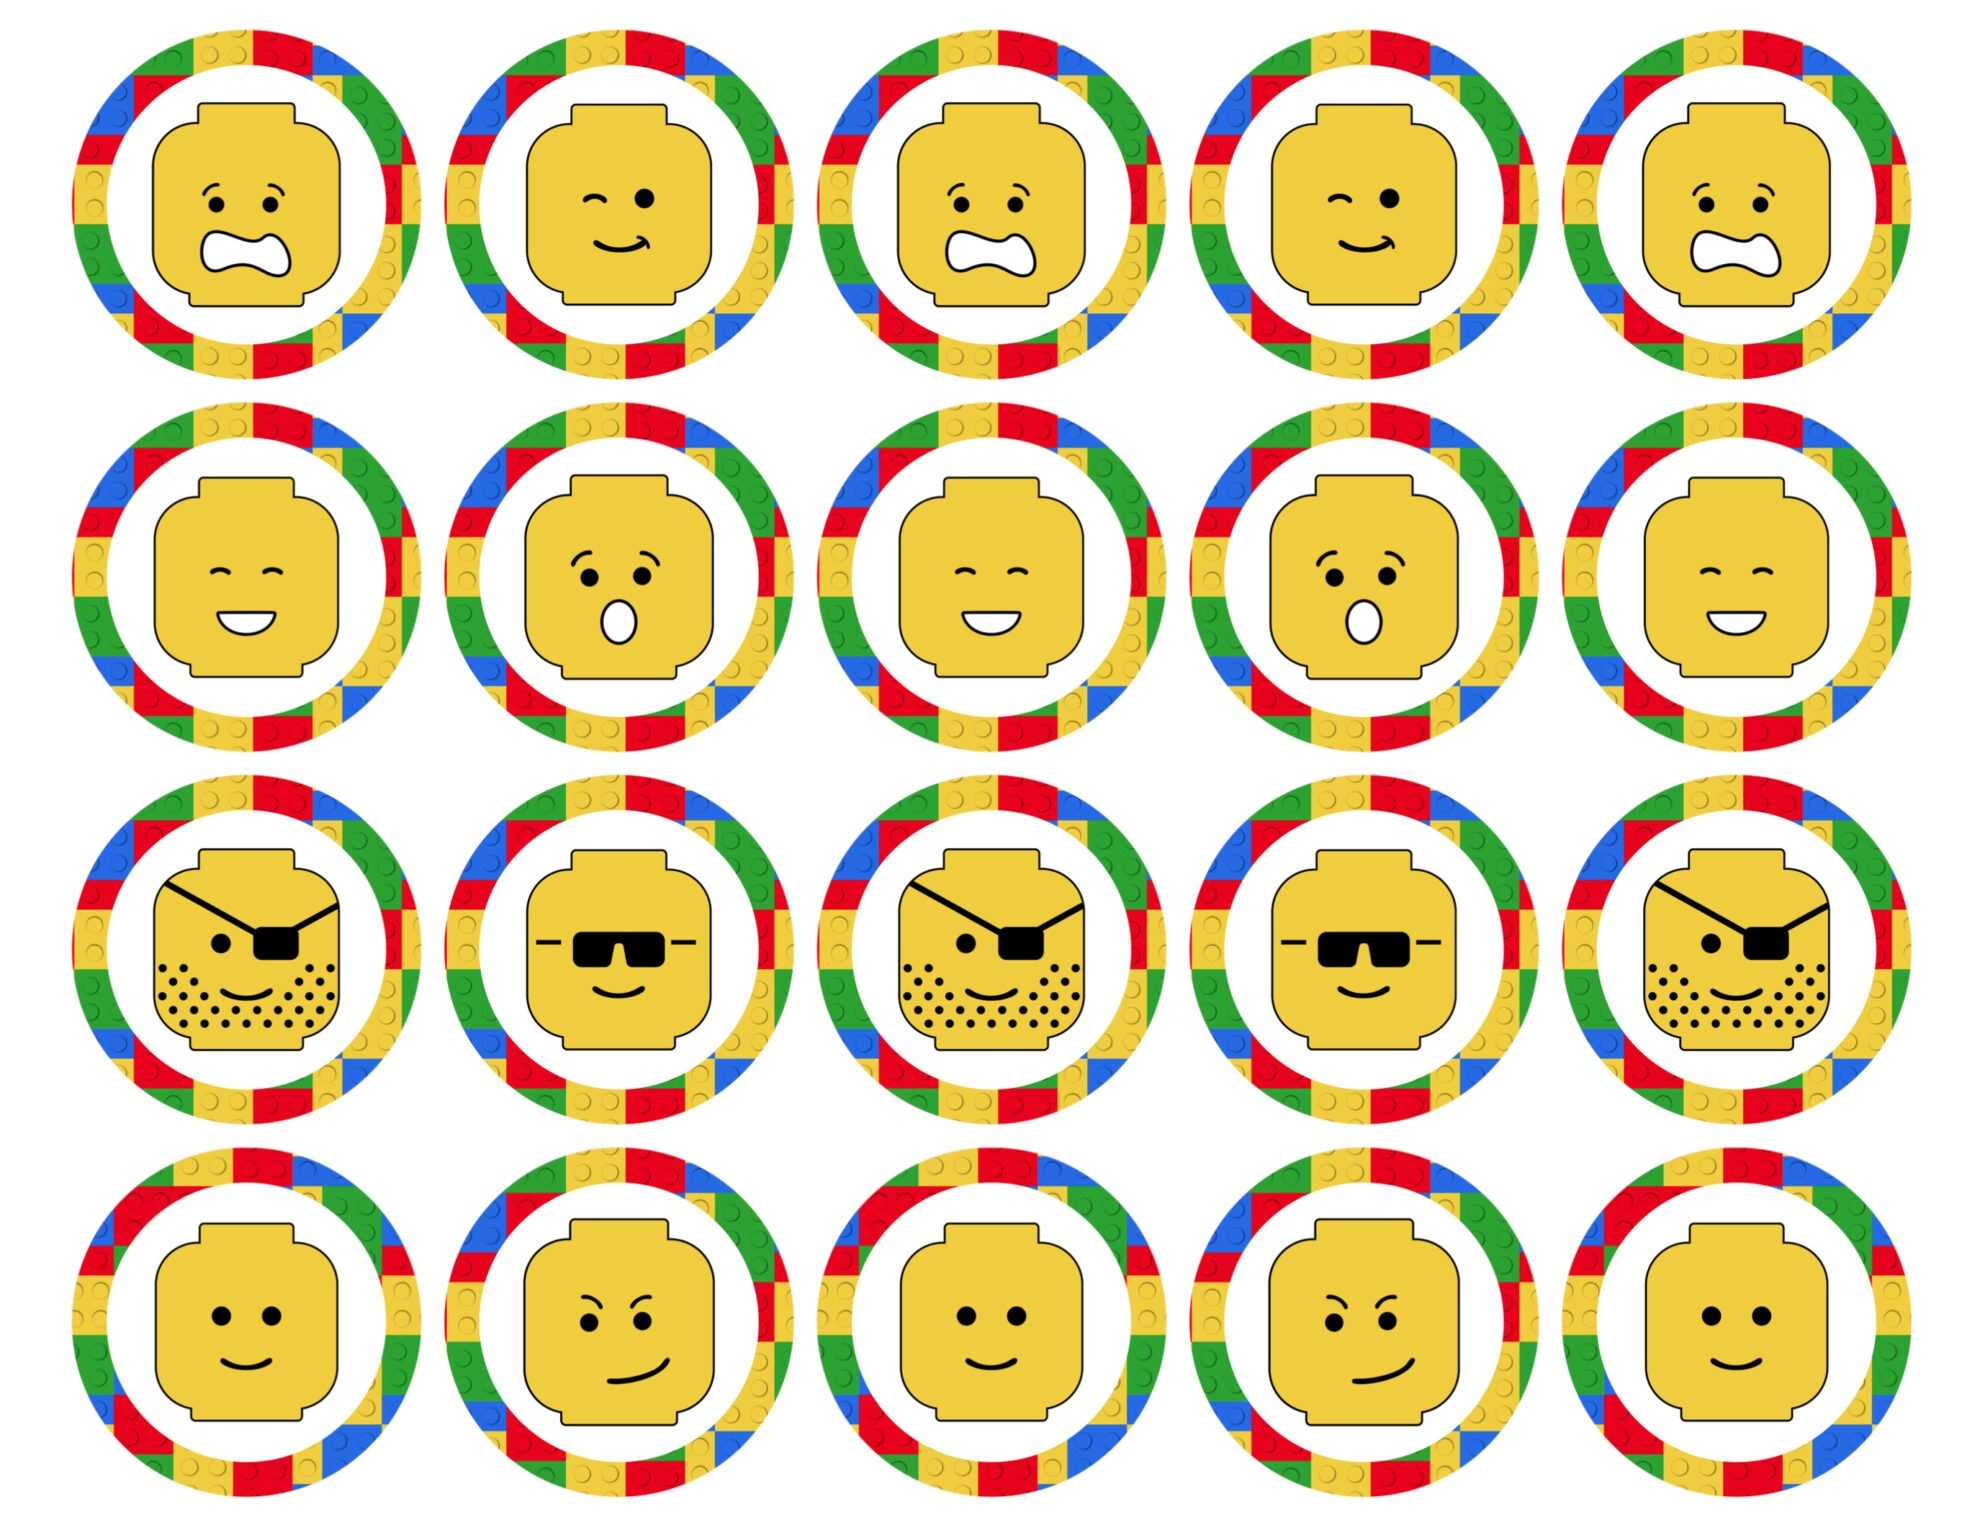 Lego Cupcake Toppers Printable - Paper Trail Design - Free Printable Lego Cupcake Toppers